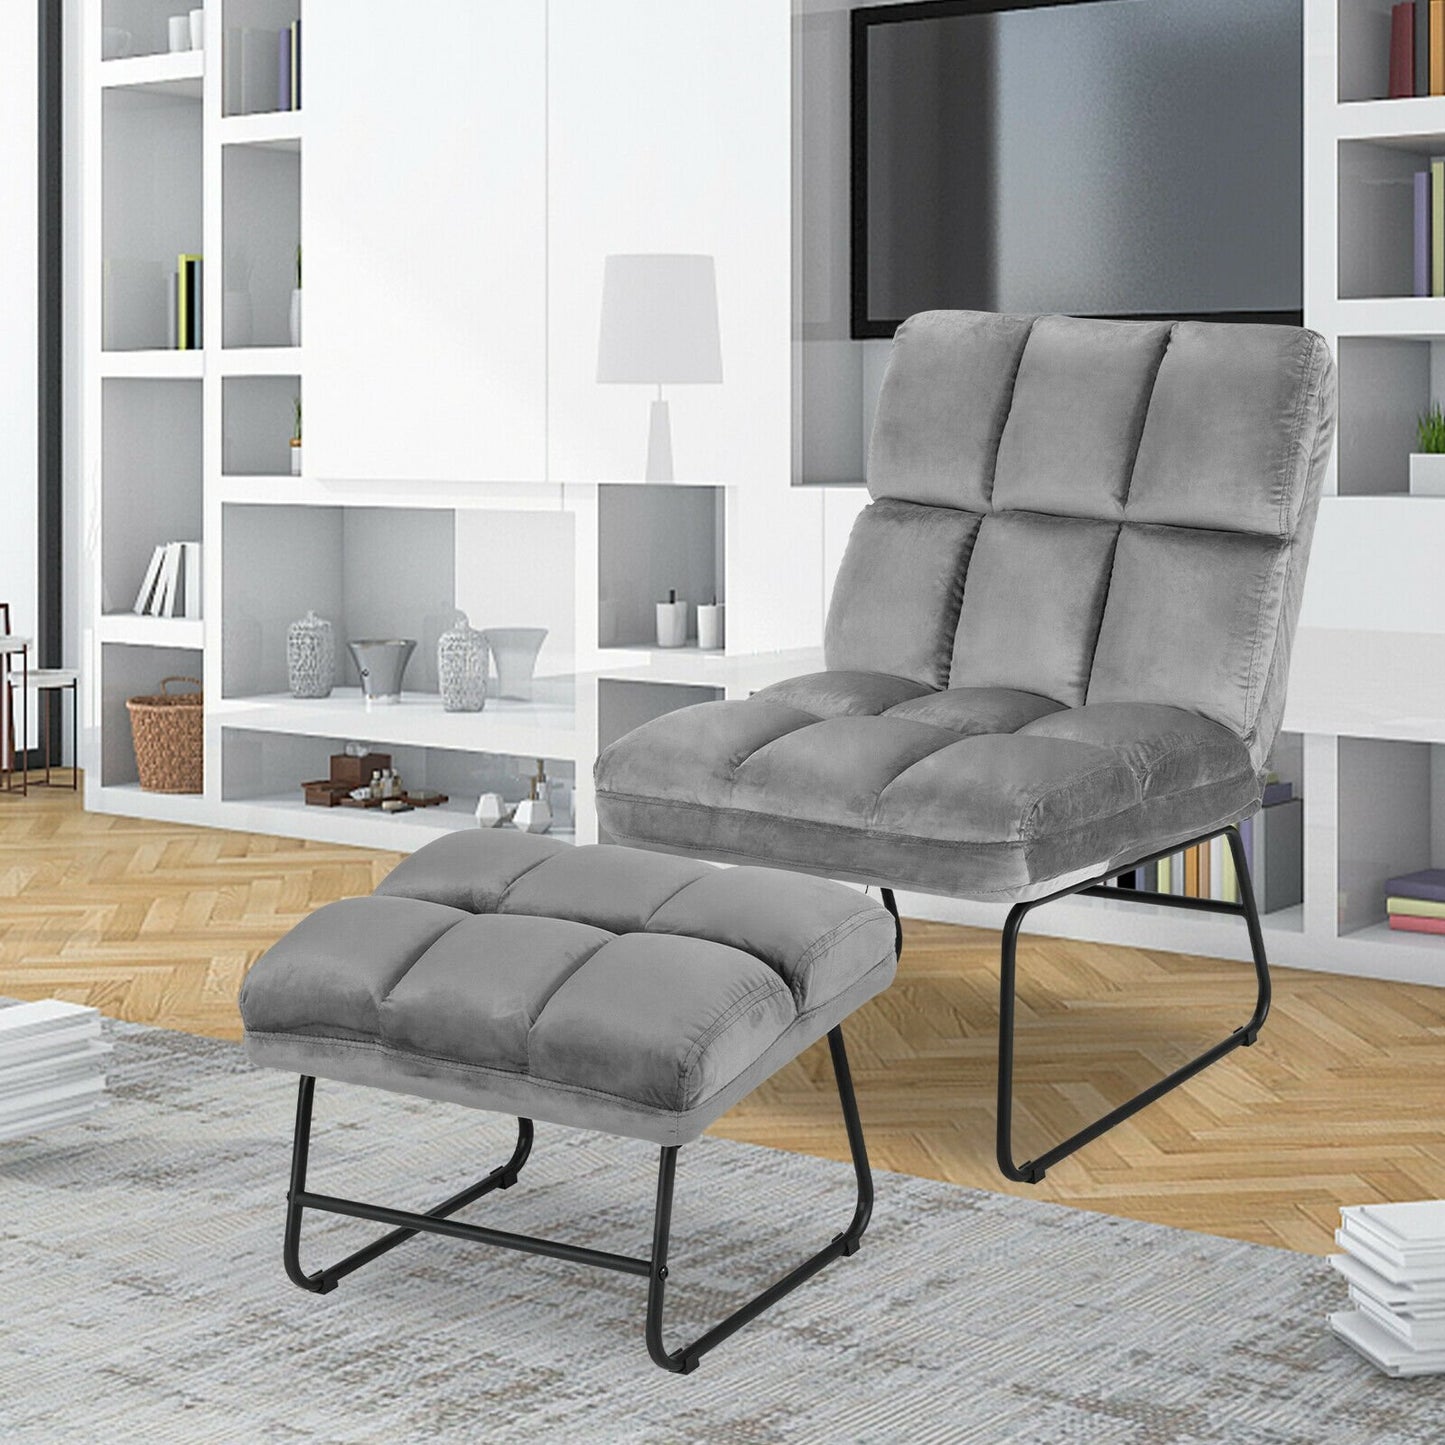 Massage Chair Velvet Accent Sofa Chair with Ottoman and Remote Control - Gray, Gray - Gallery Canada